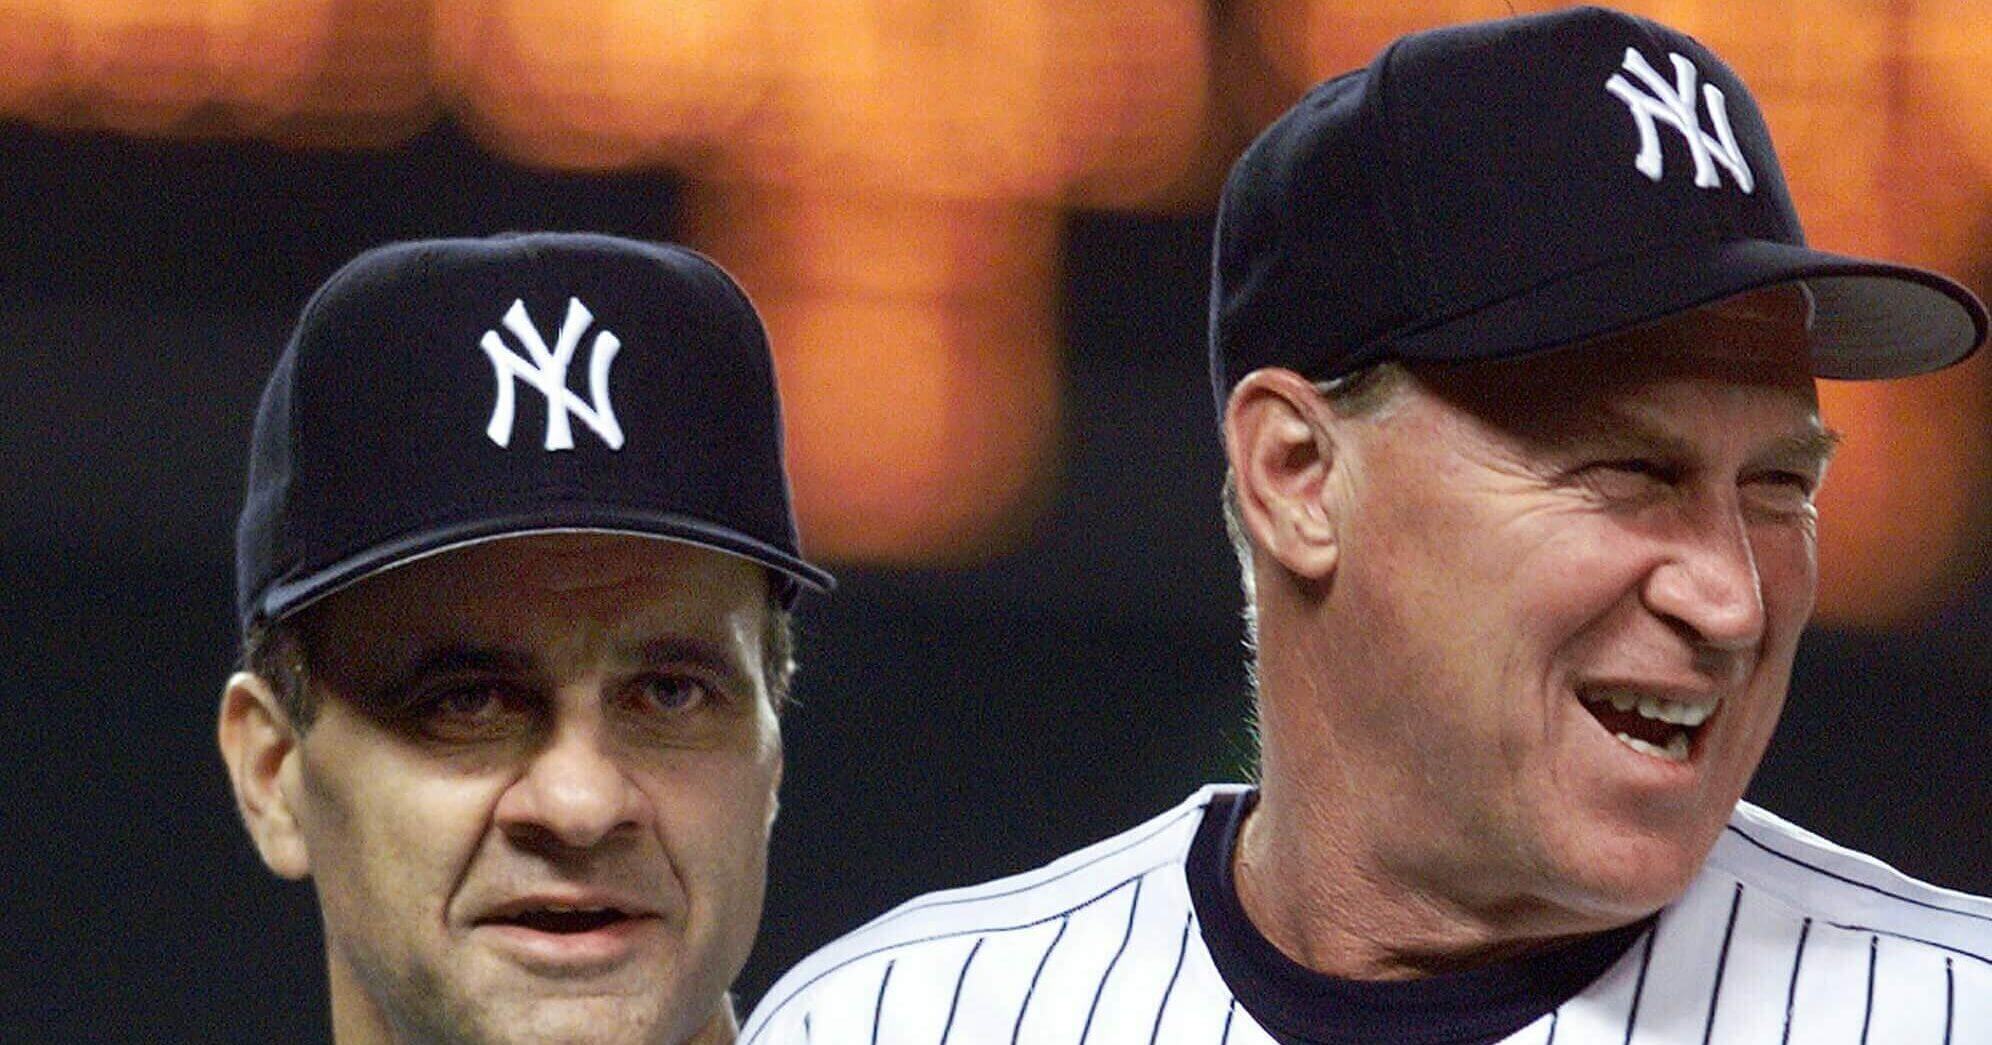 In a Aug. 27, 1999, file photo, New York Yankees manager Joe Torre, left, and pitching coach Mel Stottlemyre head onto the field to congratulate their players after the Yankees defeated the Seattle Mariners 8-0 in New York.